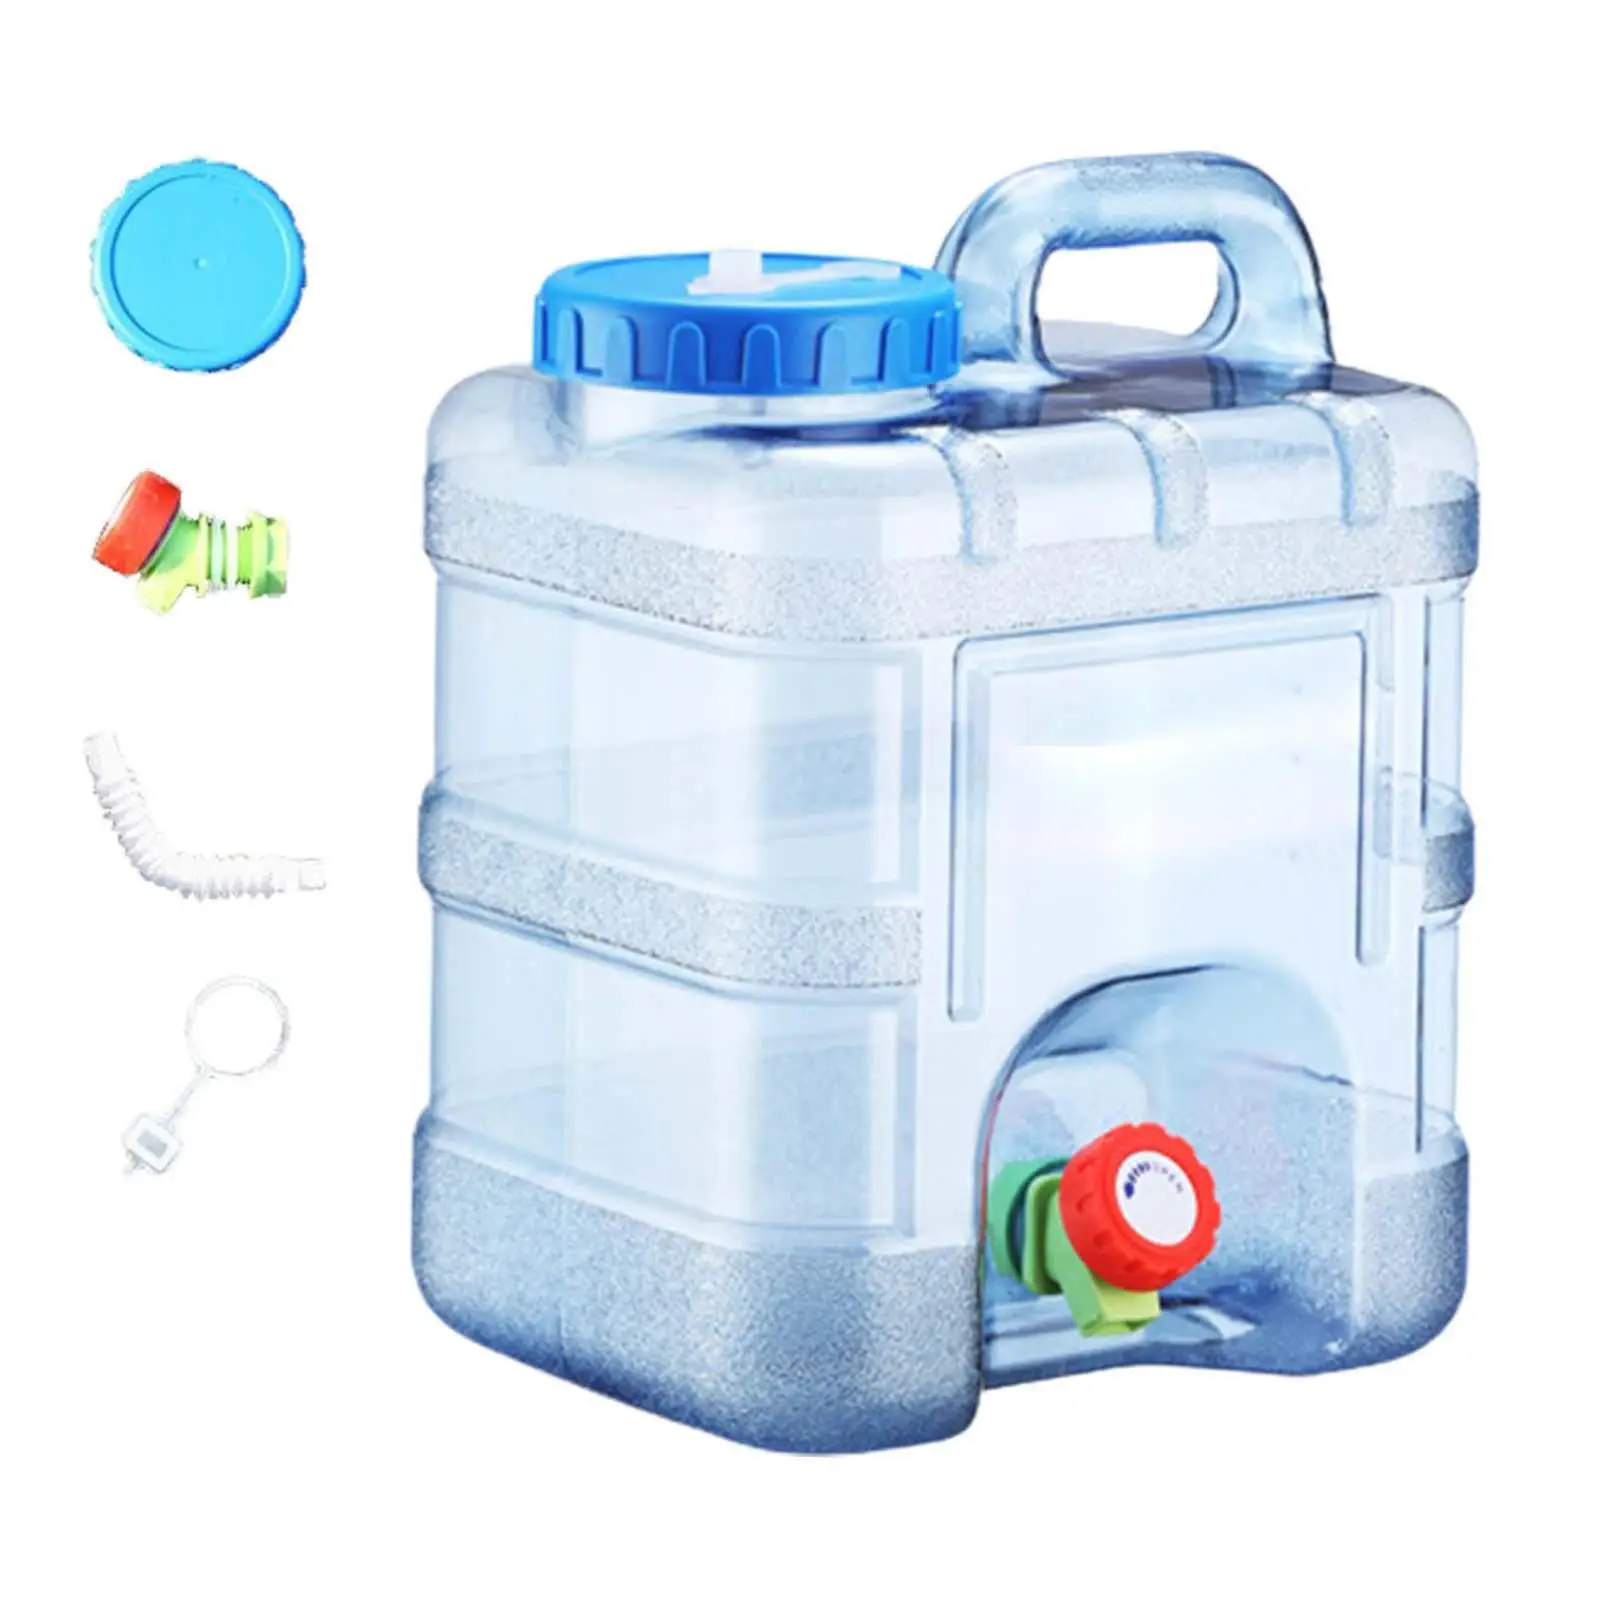 Camping Water Container with Faucet Water Bucket Multipurpose Reusable Easily Clean Water Barrel 10cm Opening Mouth for Camping